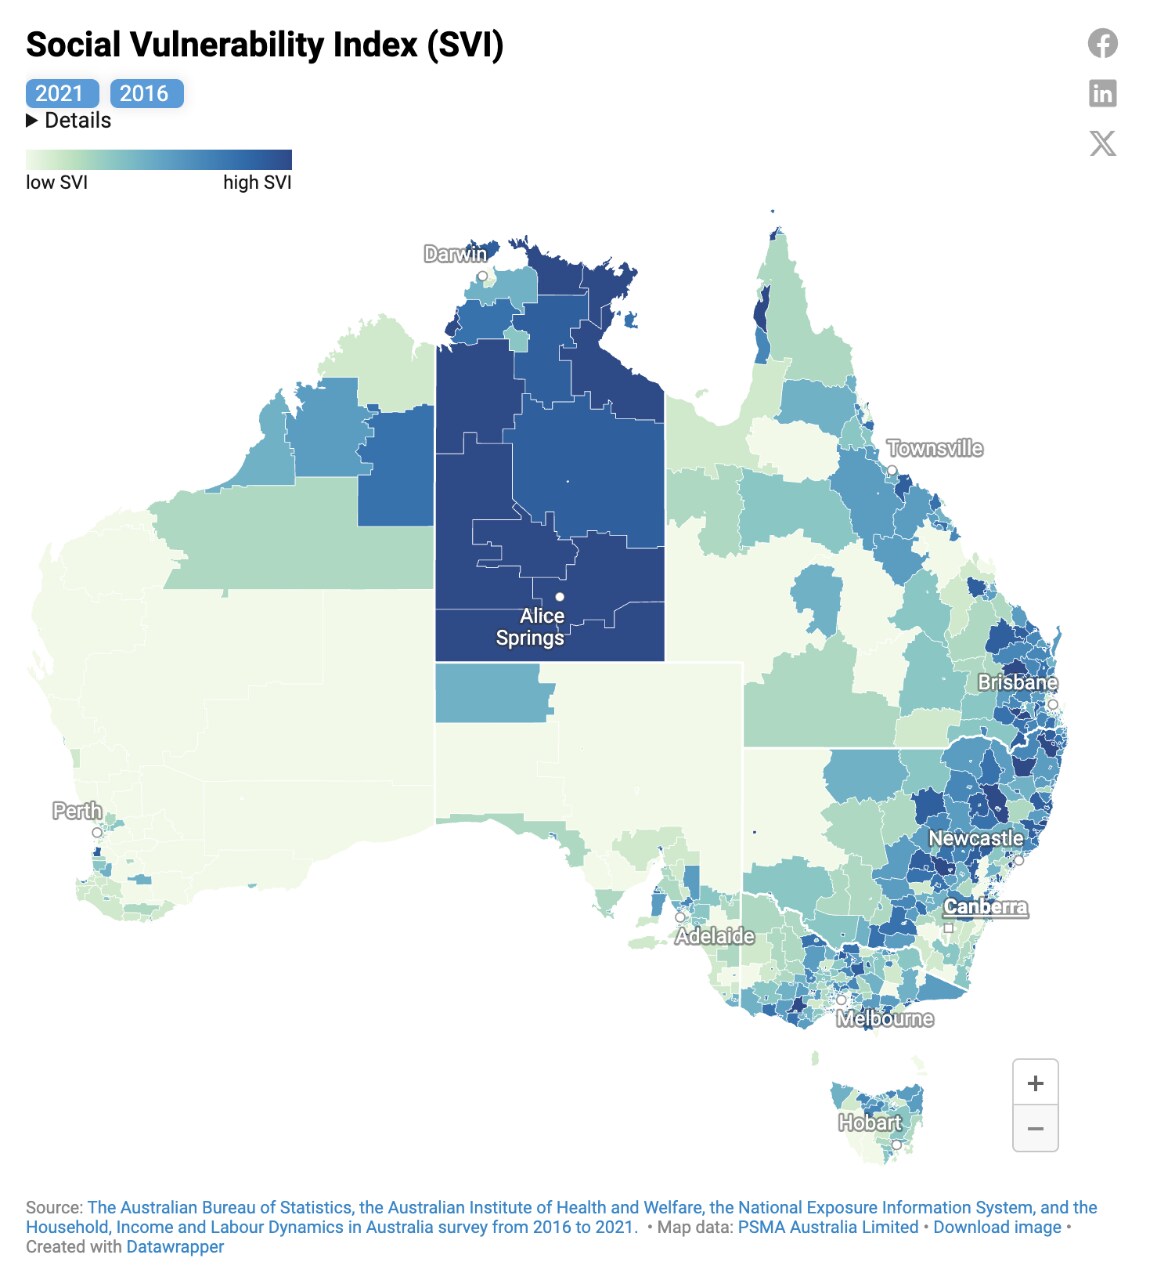 Visualisation of Social Vulnerability Index data over a map of Australia